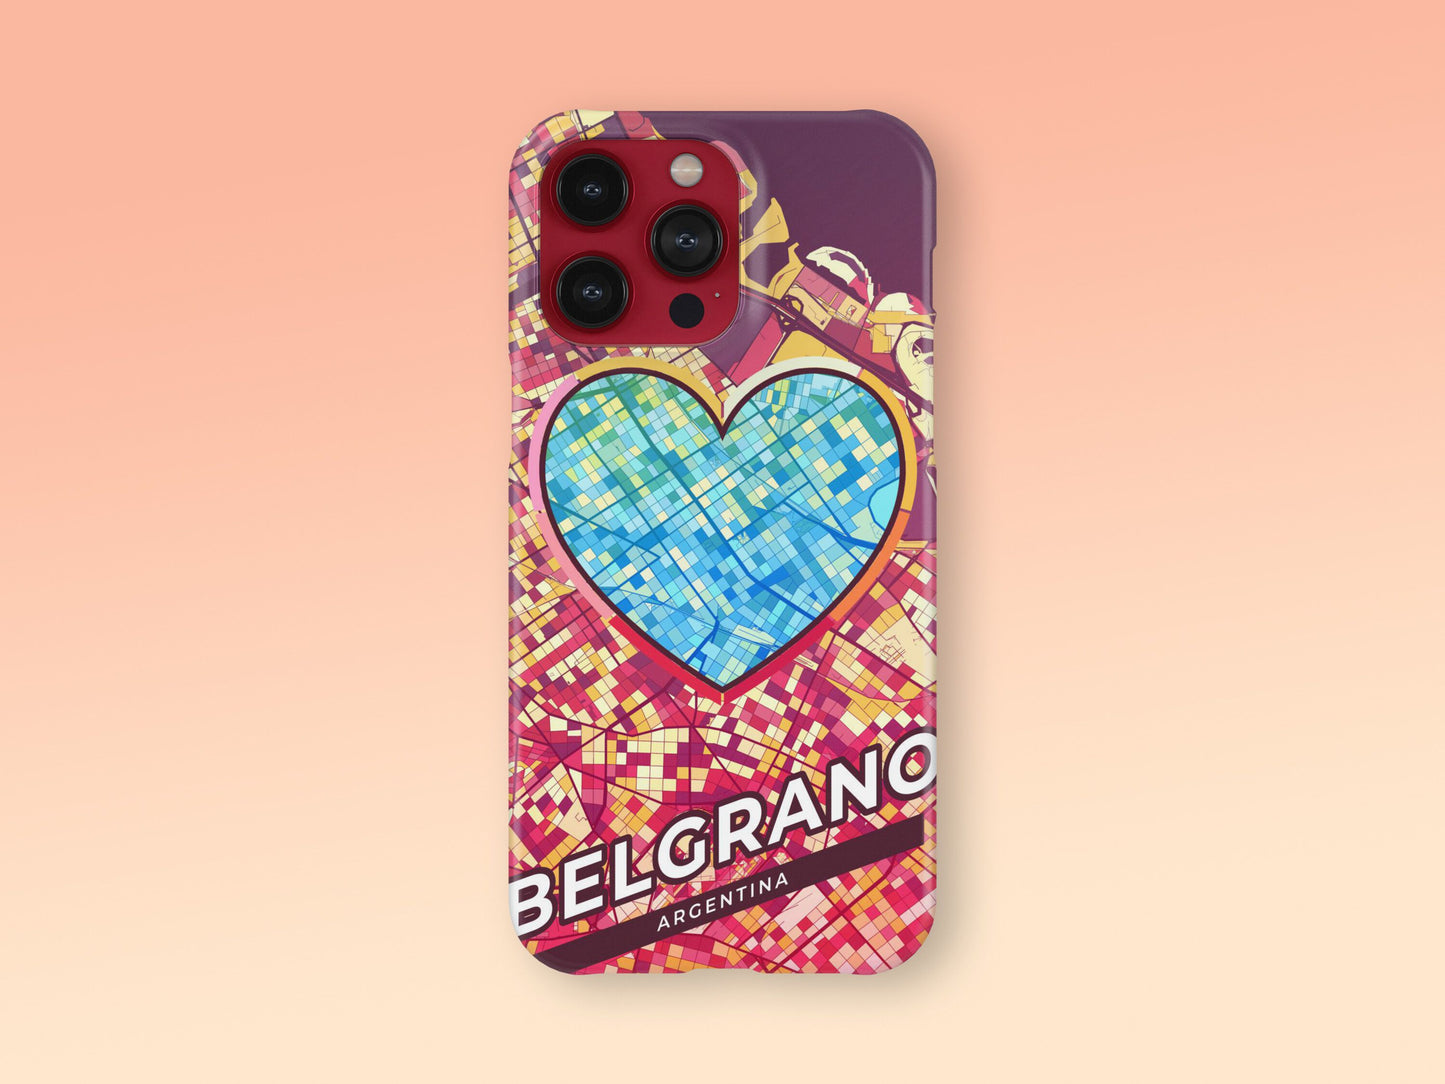 Belgrano Argentina slim phone case with colorful icon. Birthday, wedding or housewarming gift. Couple match cases. 2